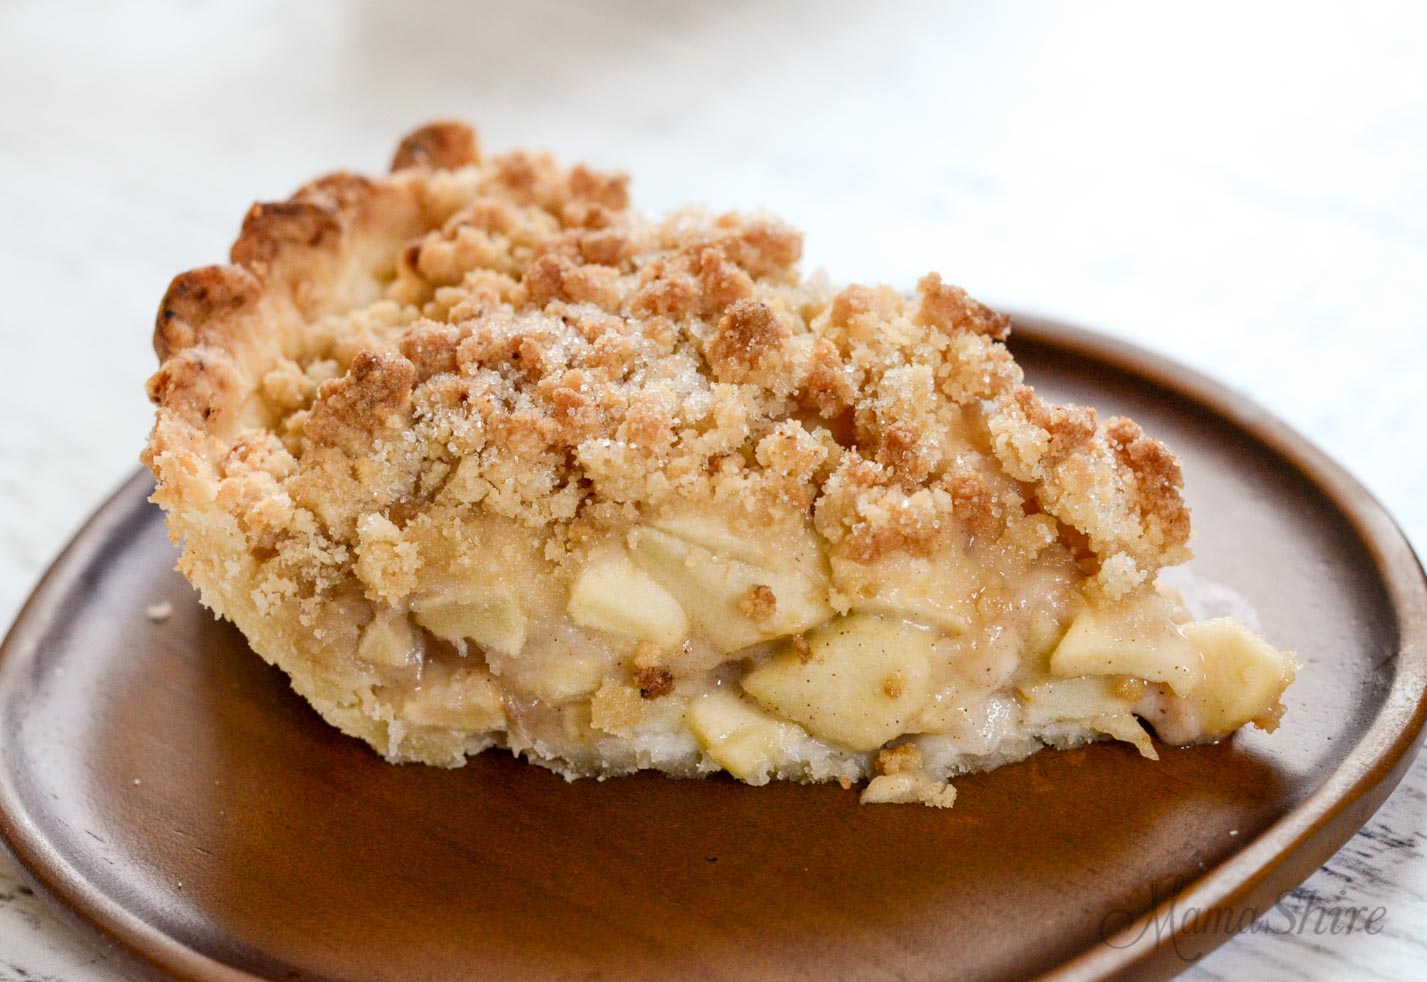 One slice of a Dutch apple pie made from a gluten-free recipe. It has a streusel topping on top of the apples instead of a second crust.